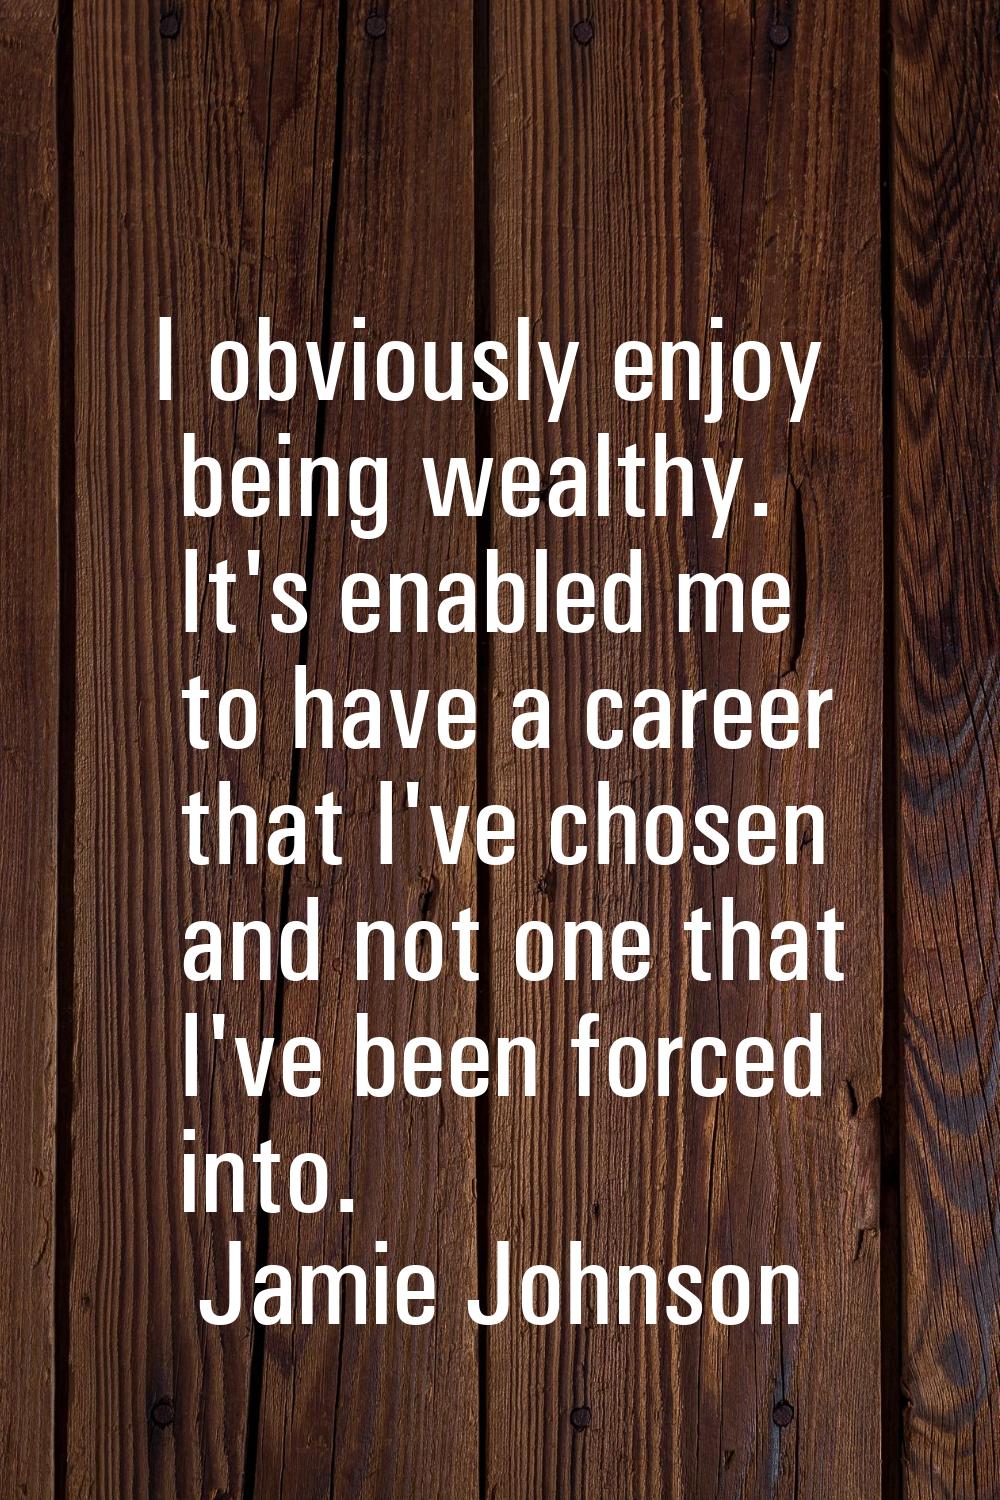 I obviously enjoy being wealthy. It's enabled me to have a career that I've chosen and not one that